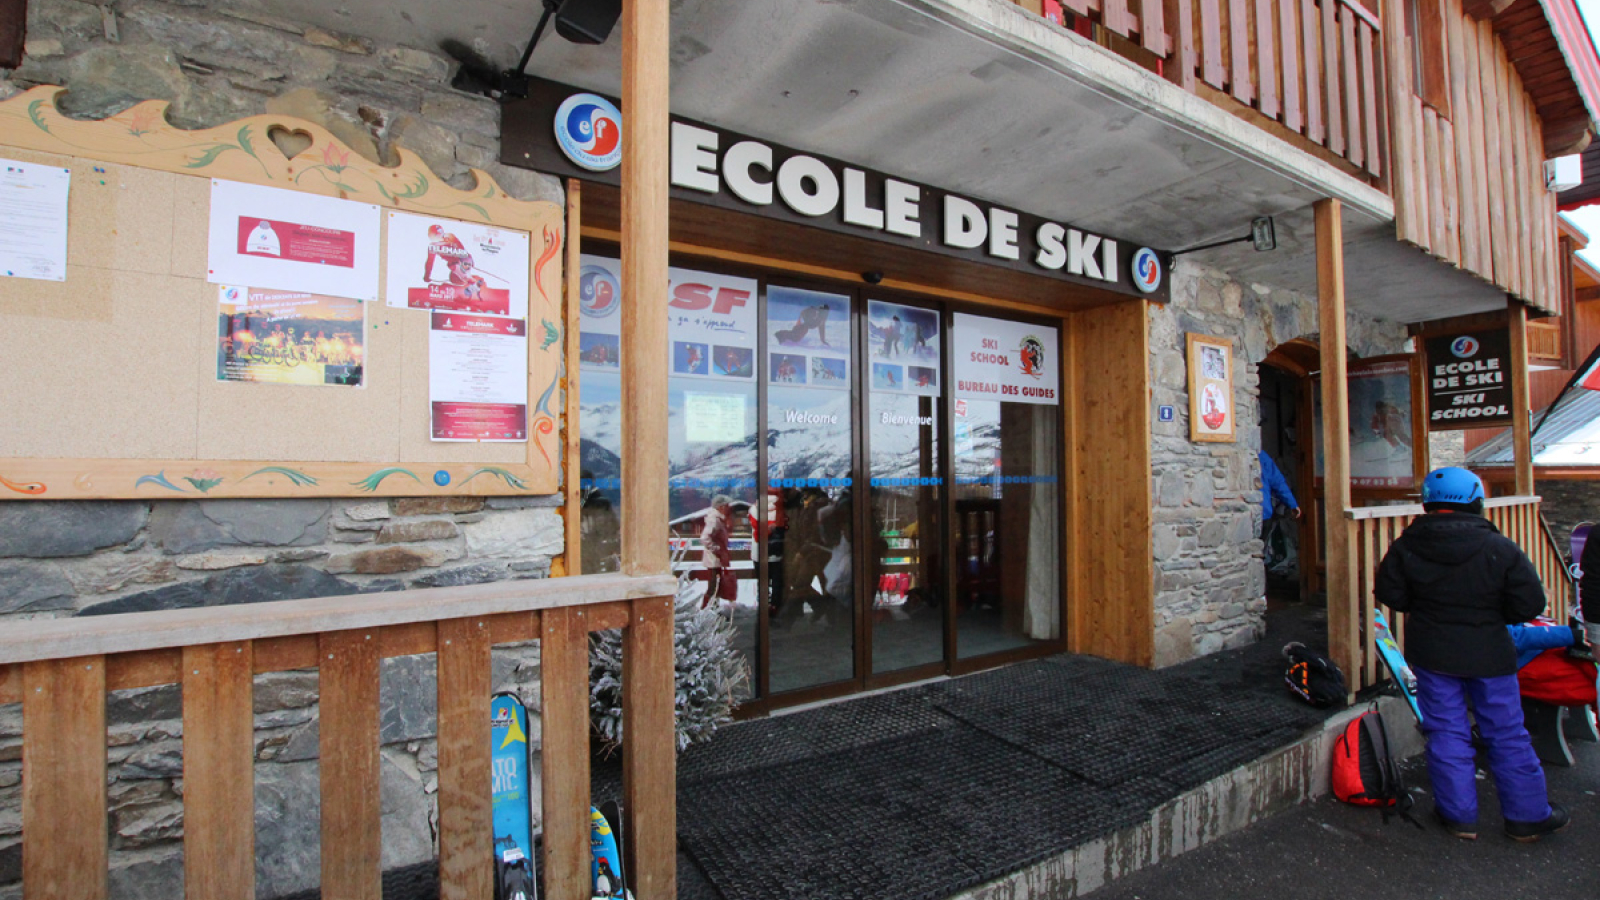 Entrance to the Ski School offices